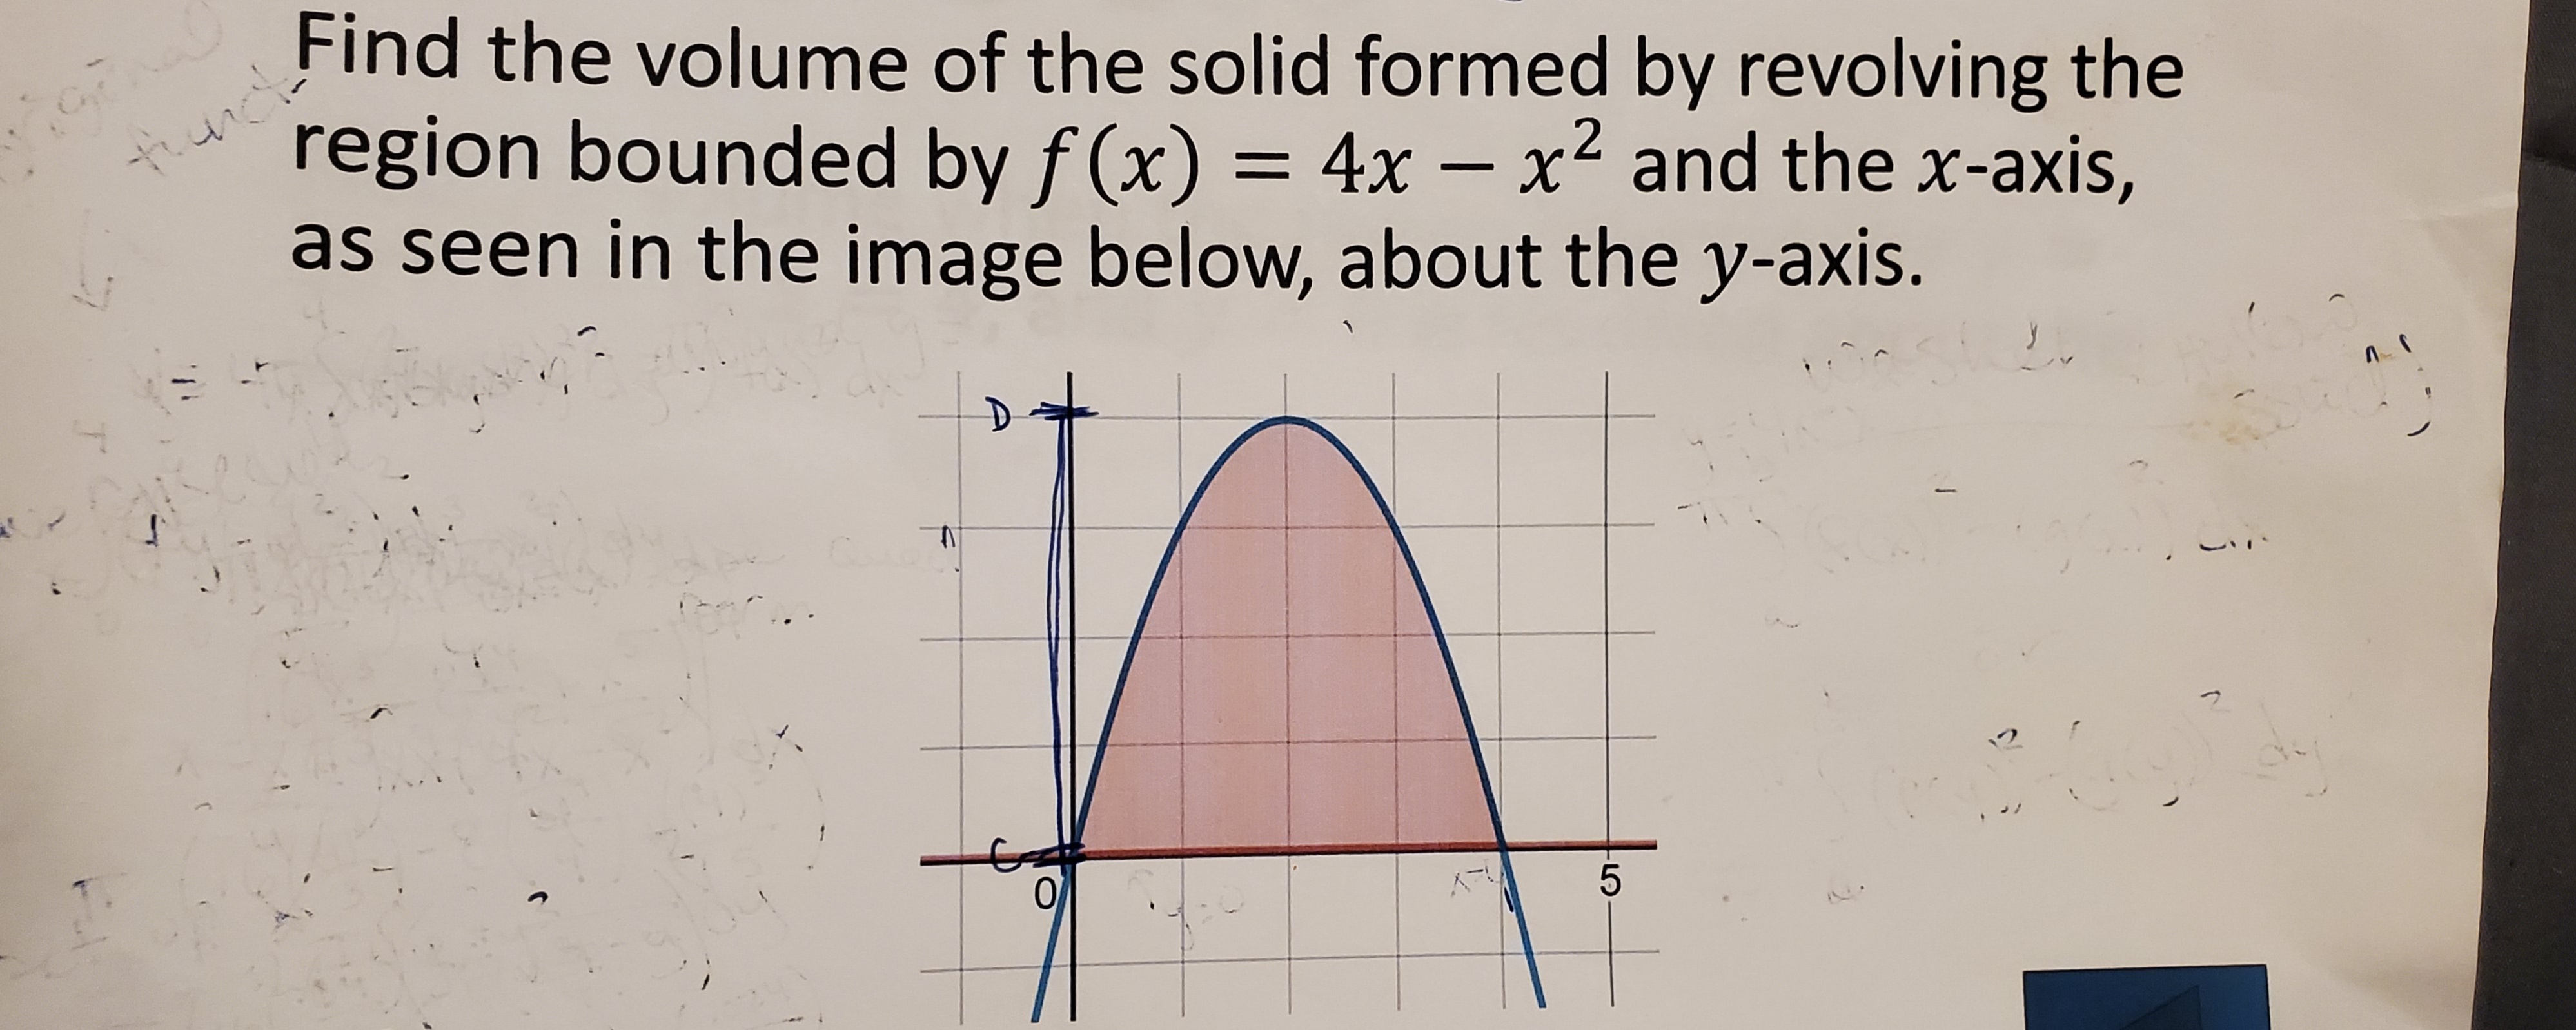 Find the volume of the solid formed by revolving the
region bounded by f (x) = 4x – x² and the x-axis,
as seen in the image below, about the y-axis.
1
